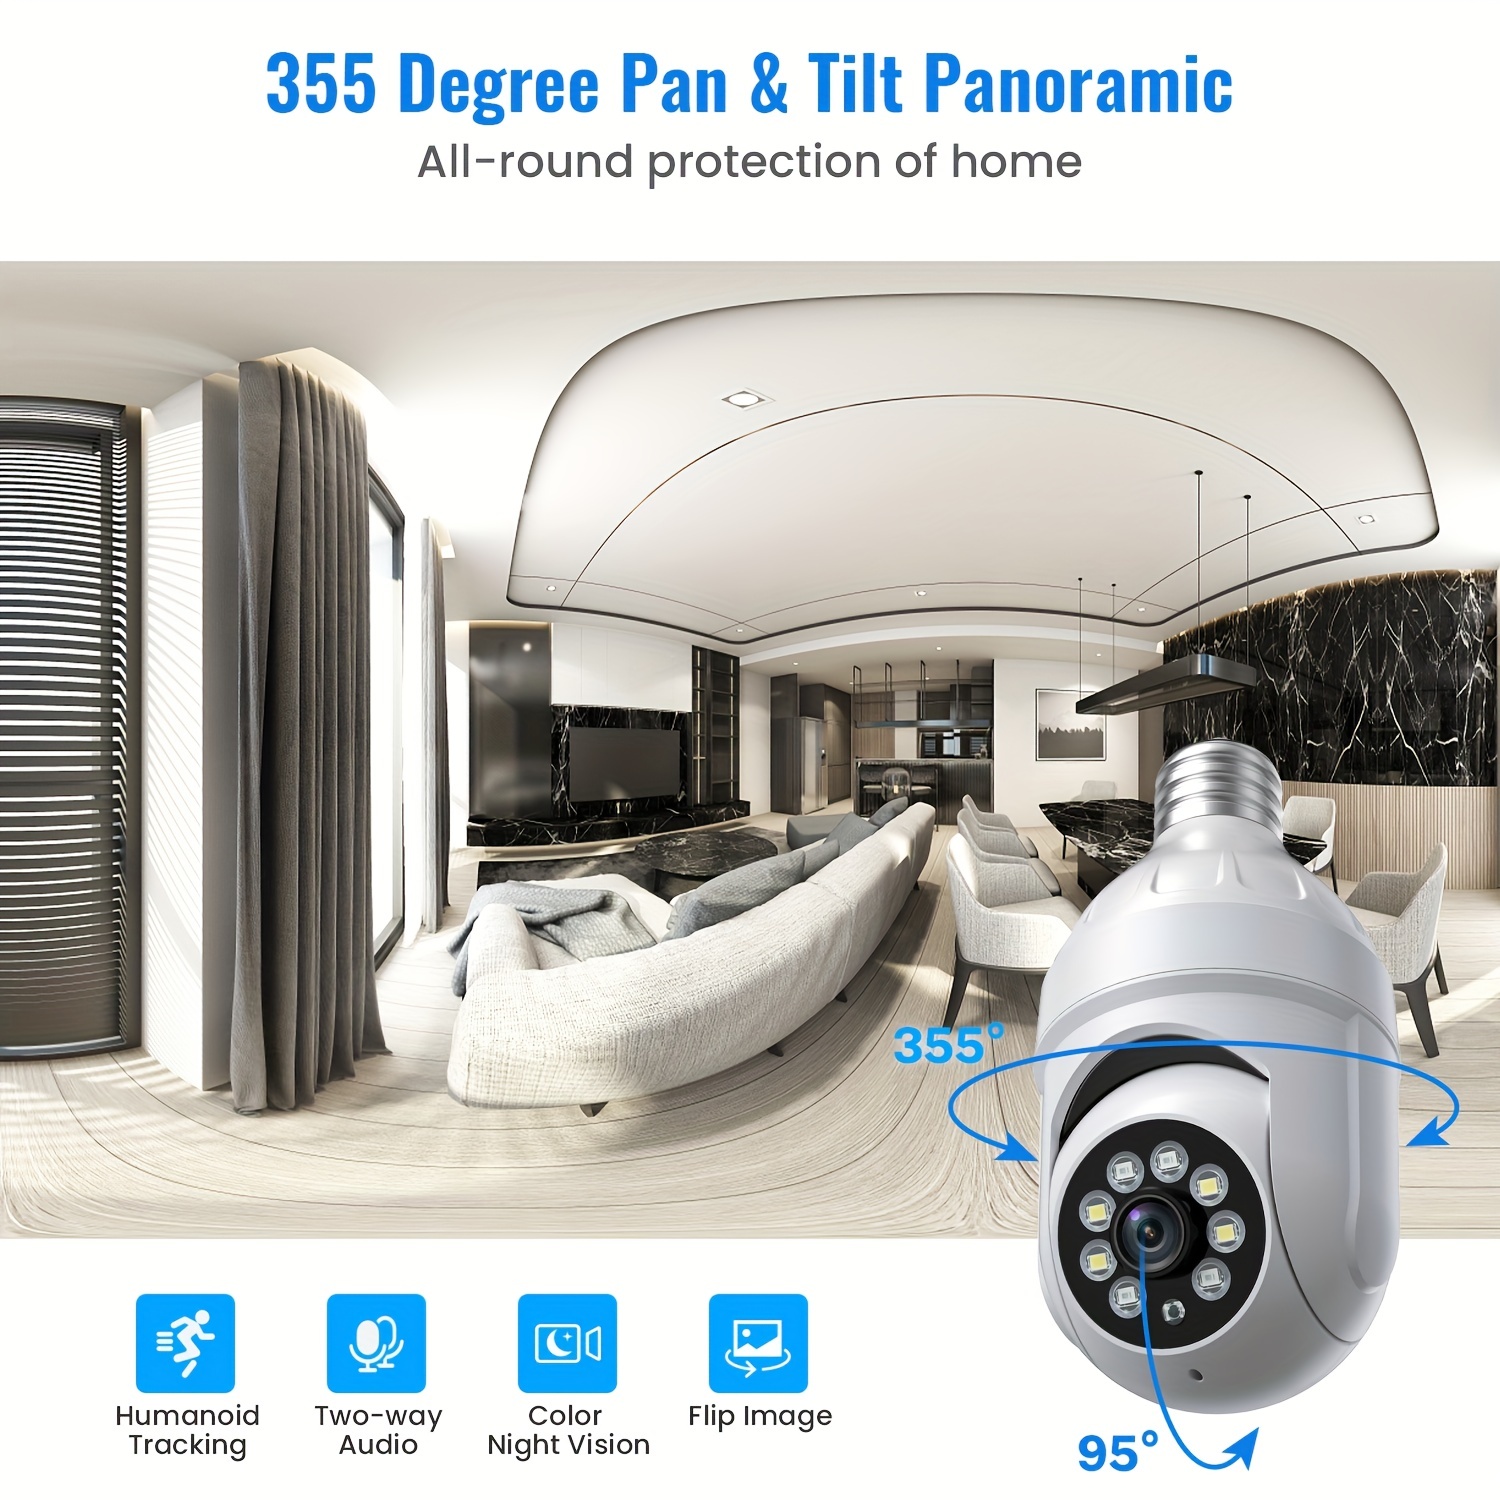 24-Hour 360 Degree Security Cameras with Night Vision for Cars